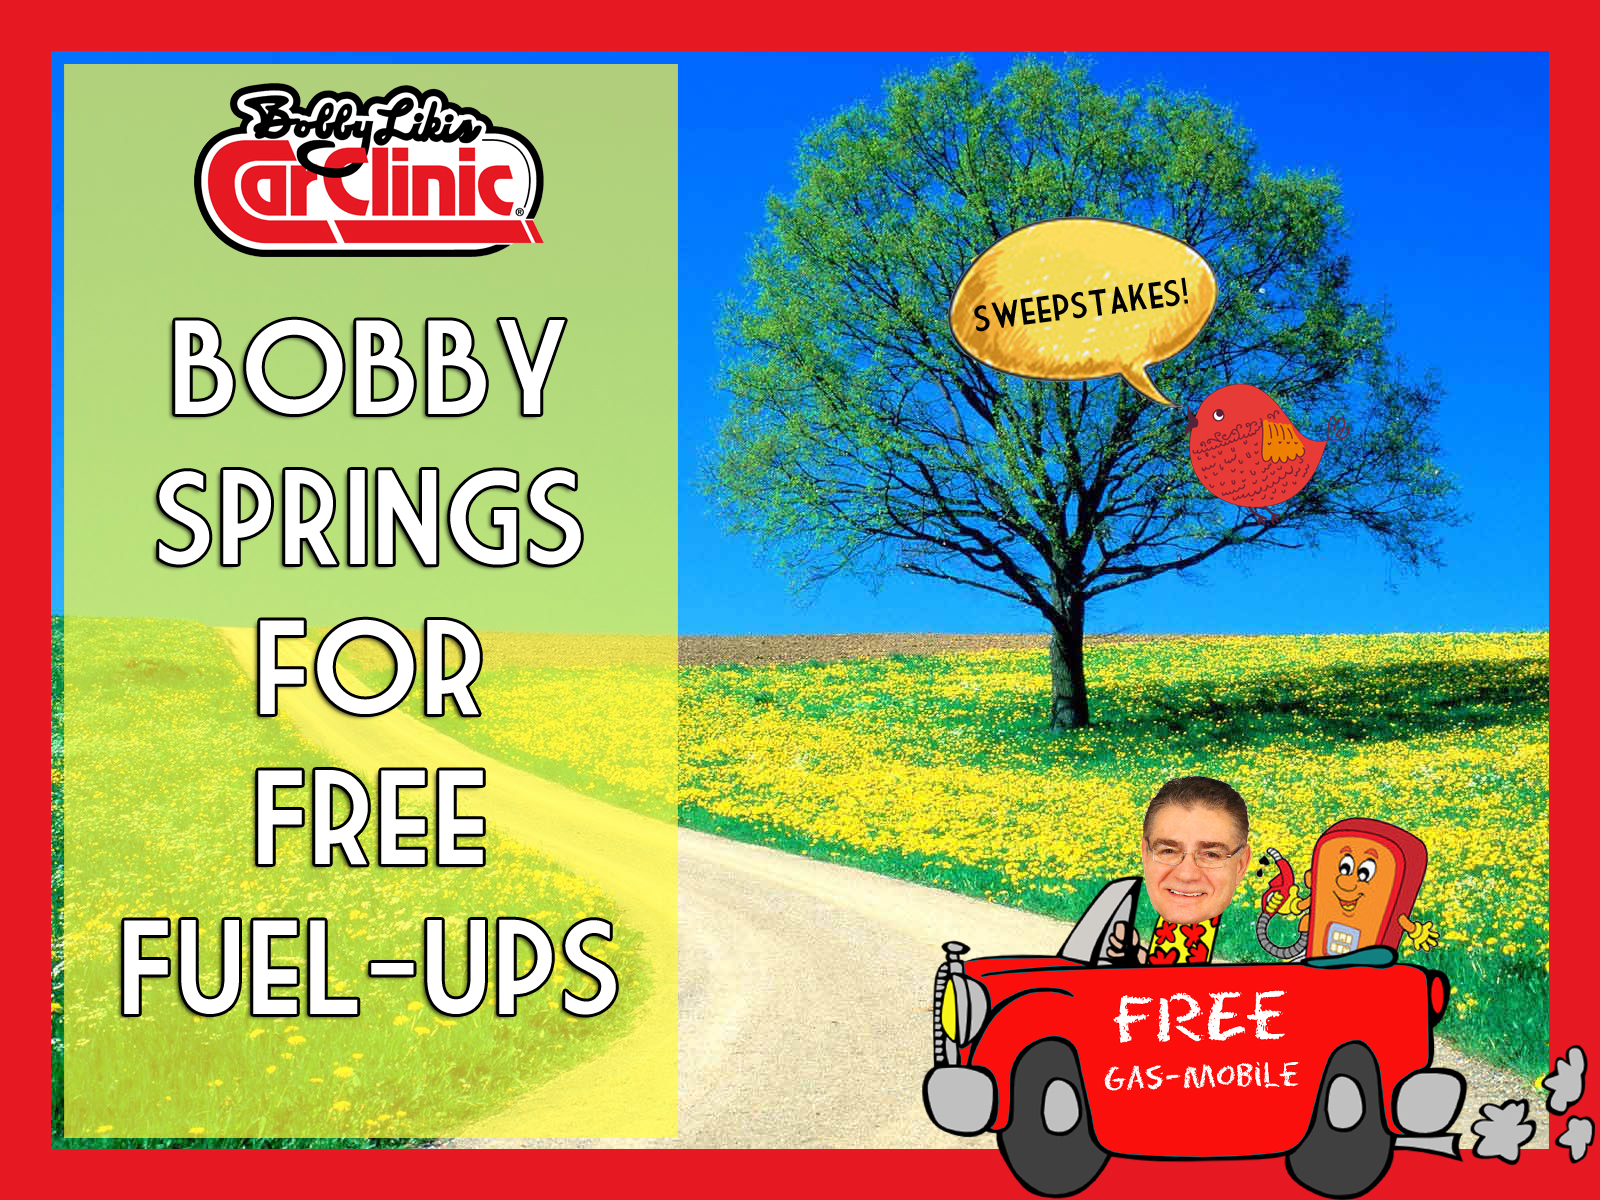 Bobby Springs for Free Fuel-Ups